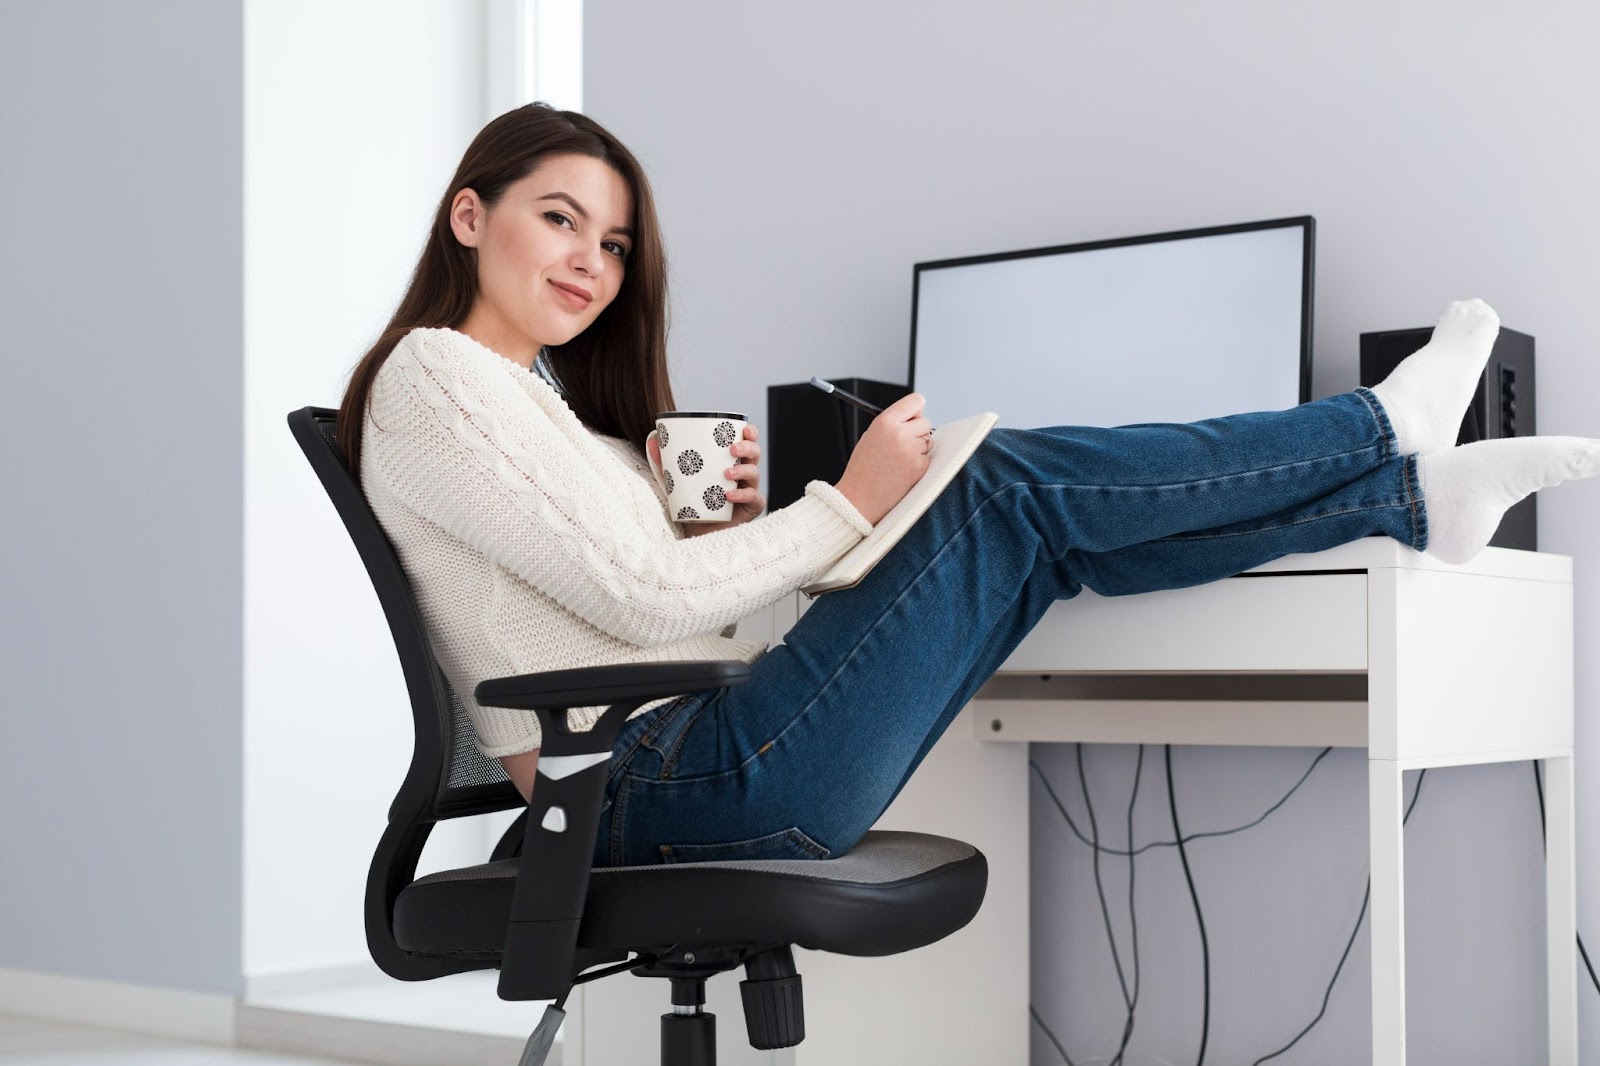 Leg stretches while sitting at desk